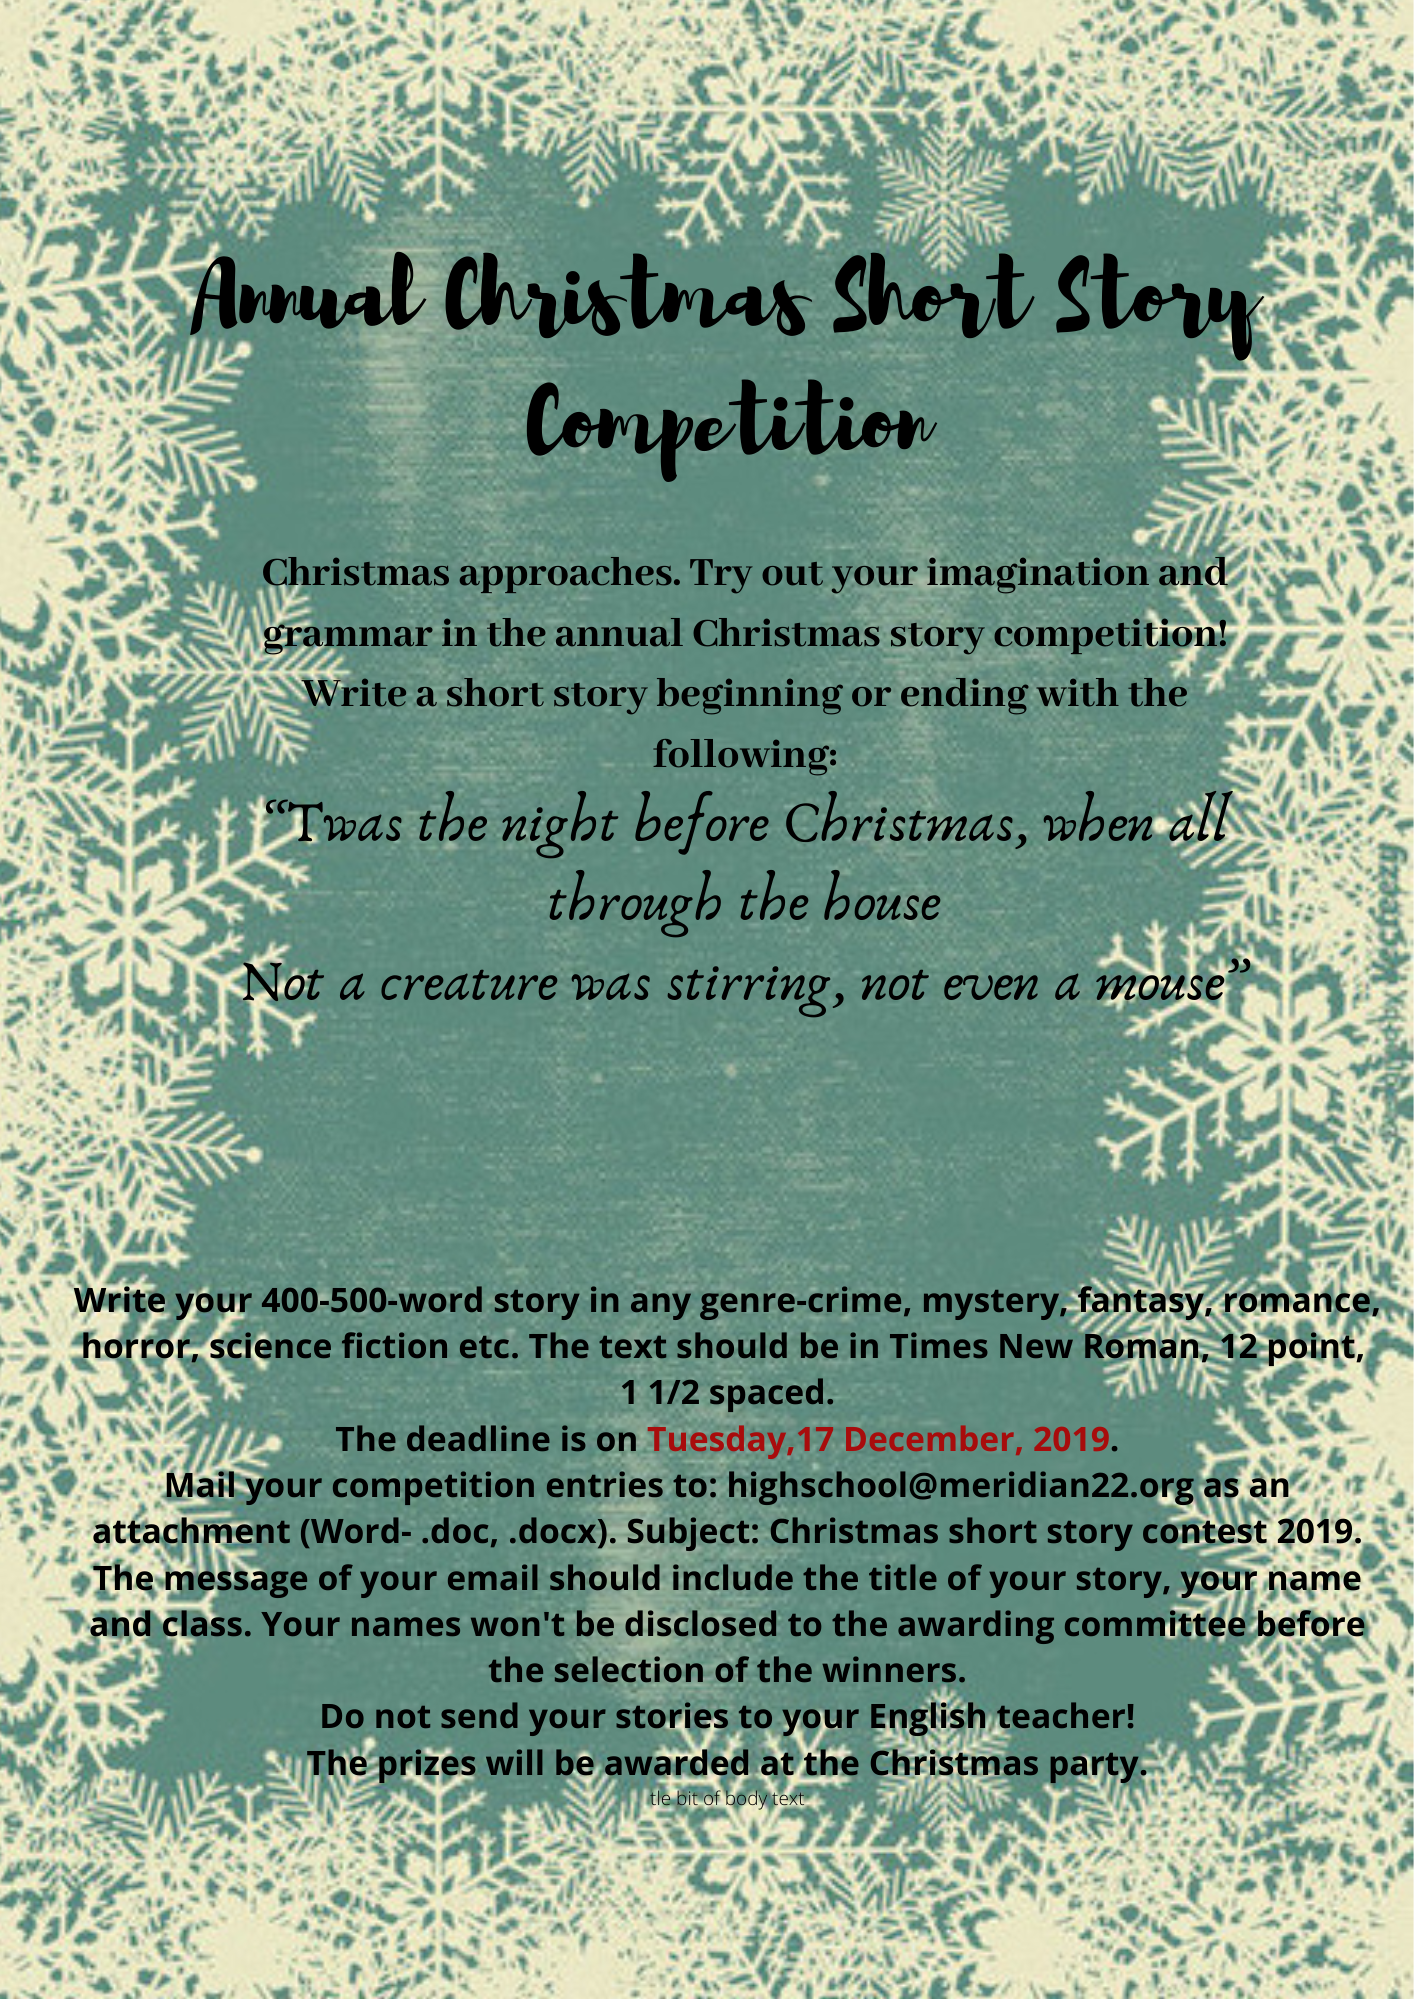 1166-annual-christmas-short-story-competitionfinal.png